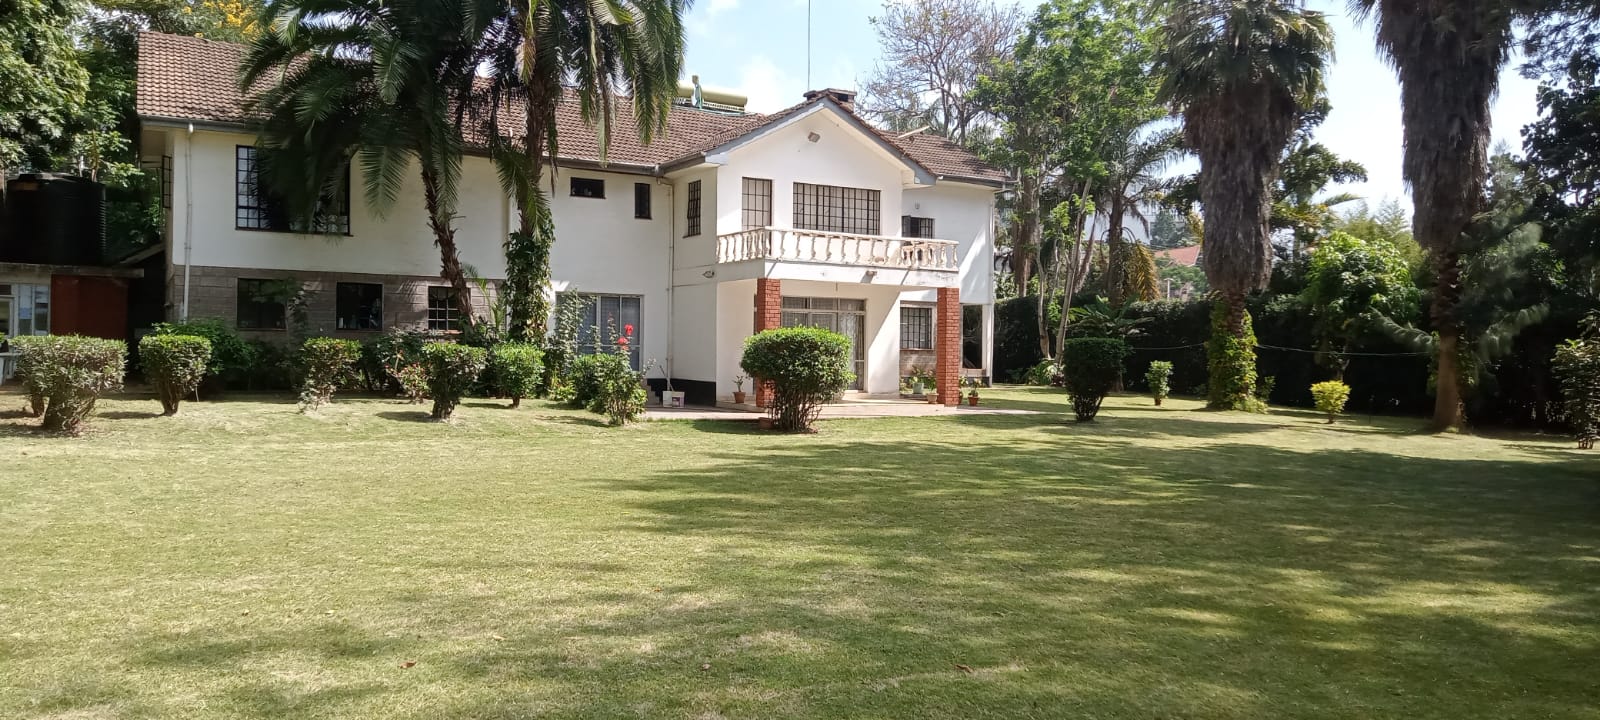 4 Bedroom Double Storey House to Let at Ksh600k Sitting on 34acres with Huge Family Room, Tv Room, Study Room, Terrace, Mature and Well-Kept Garden and more amenities (9)